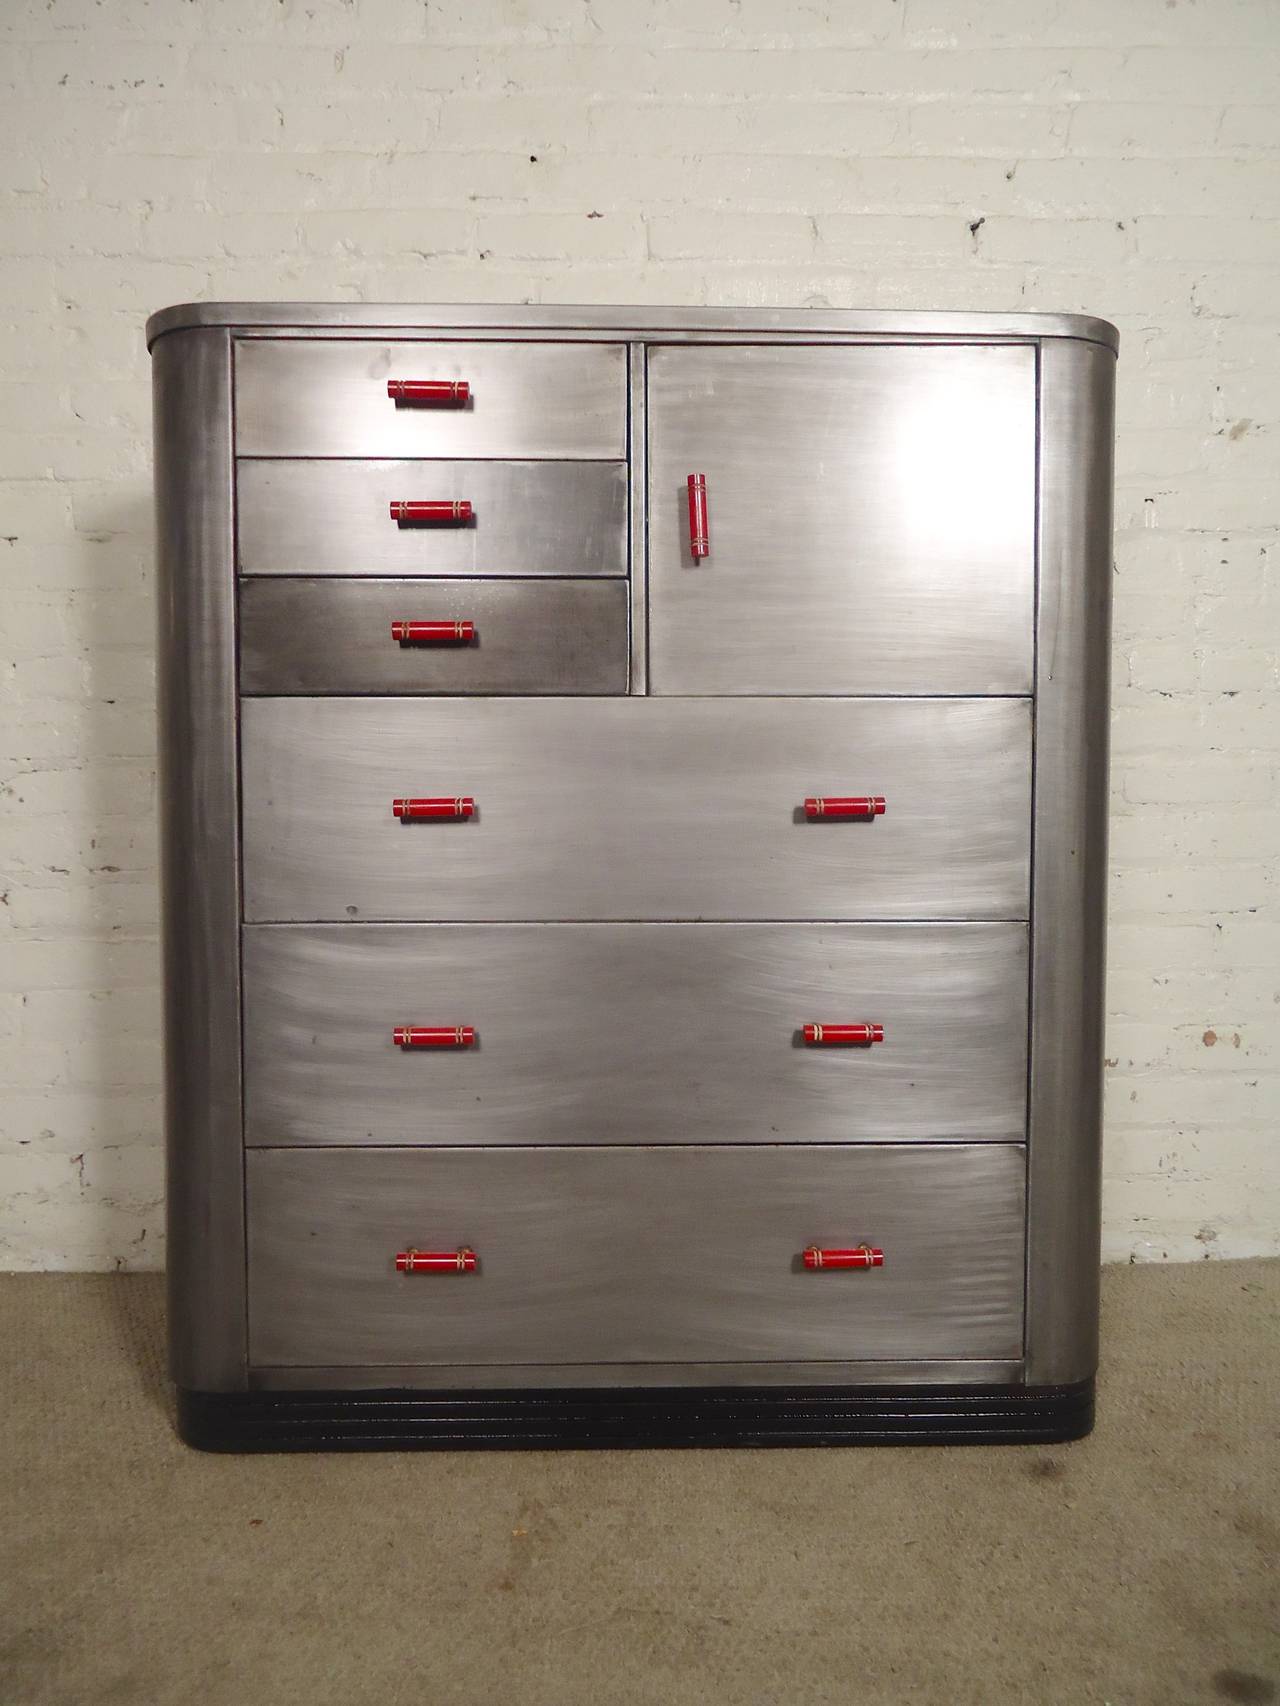 Fantastic metal dresser designed by Norman Bel Geddes featuring three wide drawers, three small and side cabinet. Original bright red pulls. Refinished in a bare metal style finish.

(Please confirm item location - NY or NJ - with dealer).